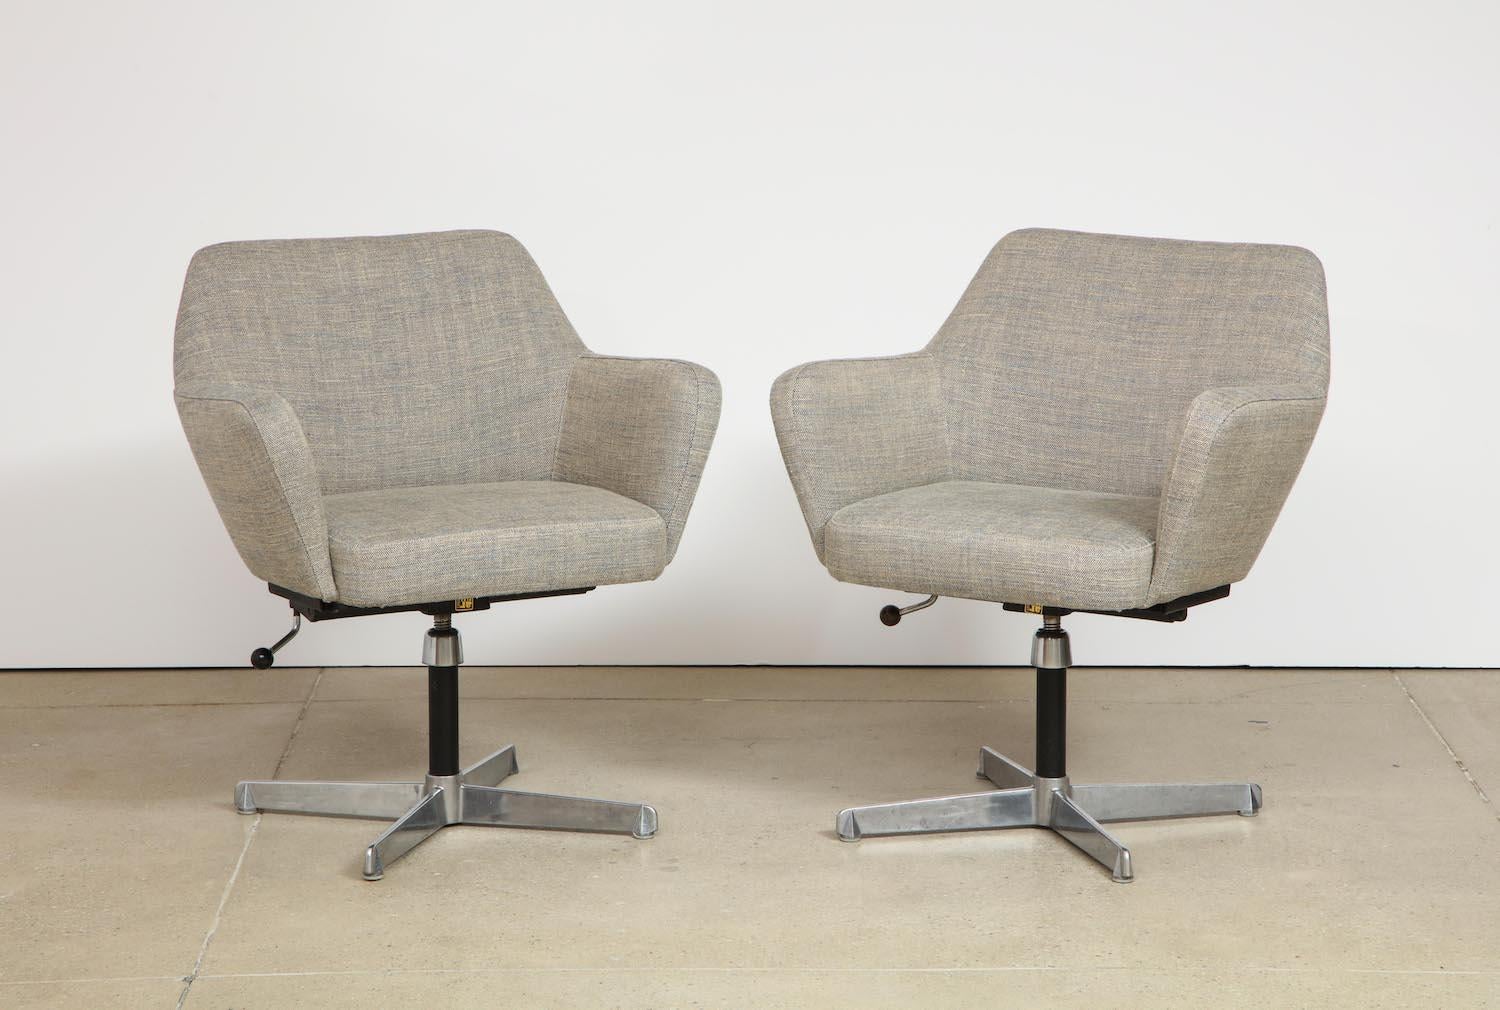 Upholstered form seat and back over chrome-plated and enameled steel swivel base. Manufacturers label to underside.